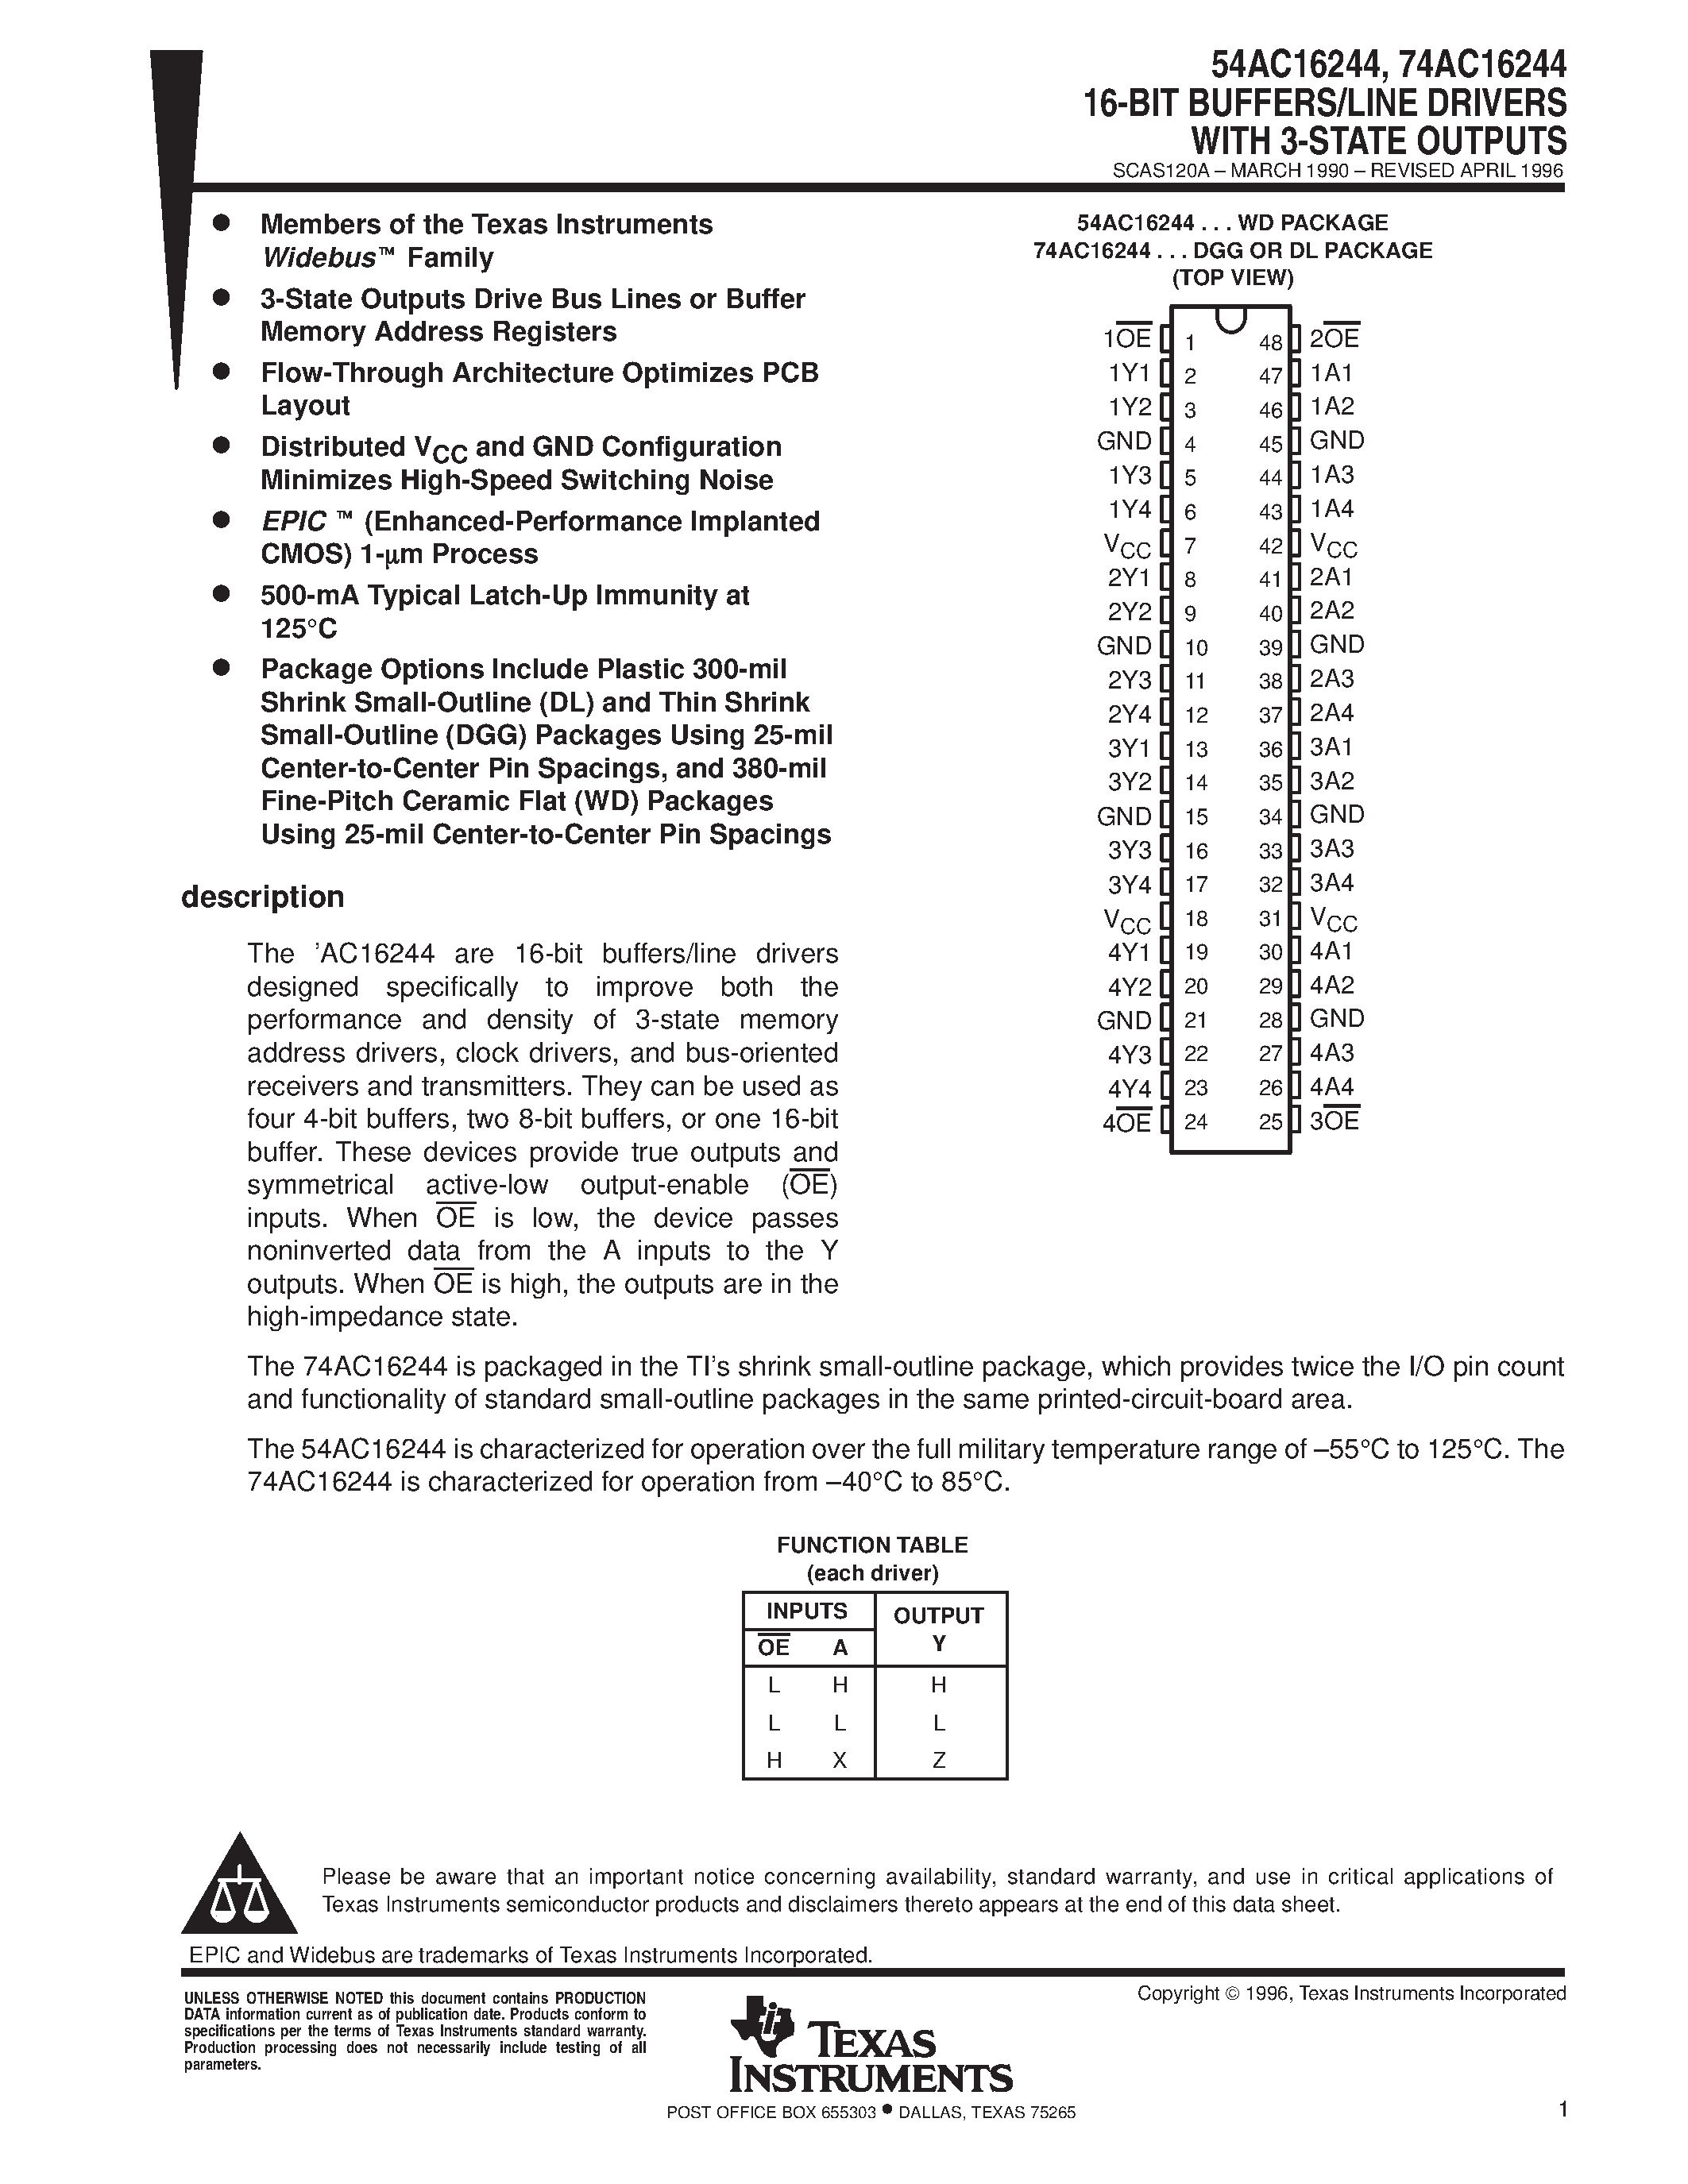 Datasheet 74AC16244SSC - 16-Bit Buffer/Line Driver with 3-STATE Outputs page 1